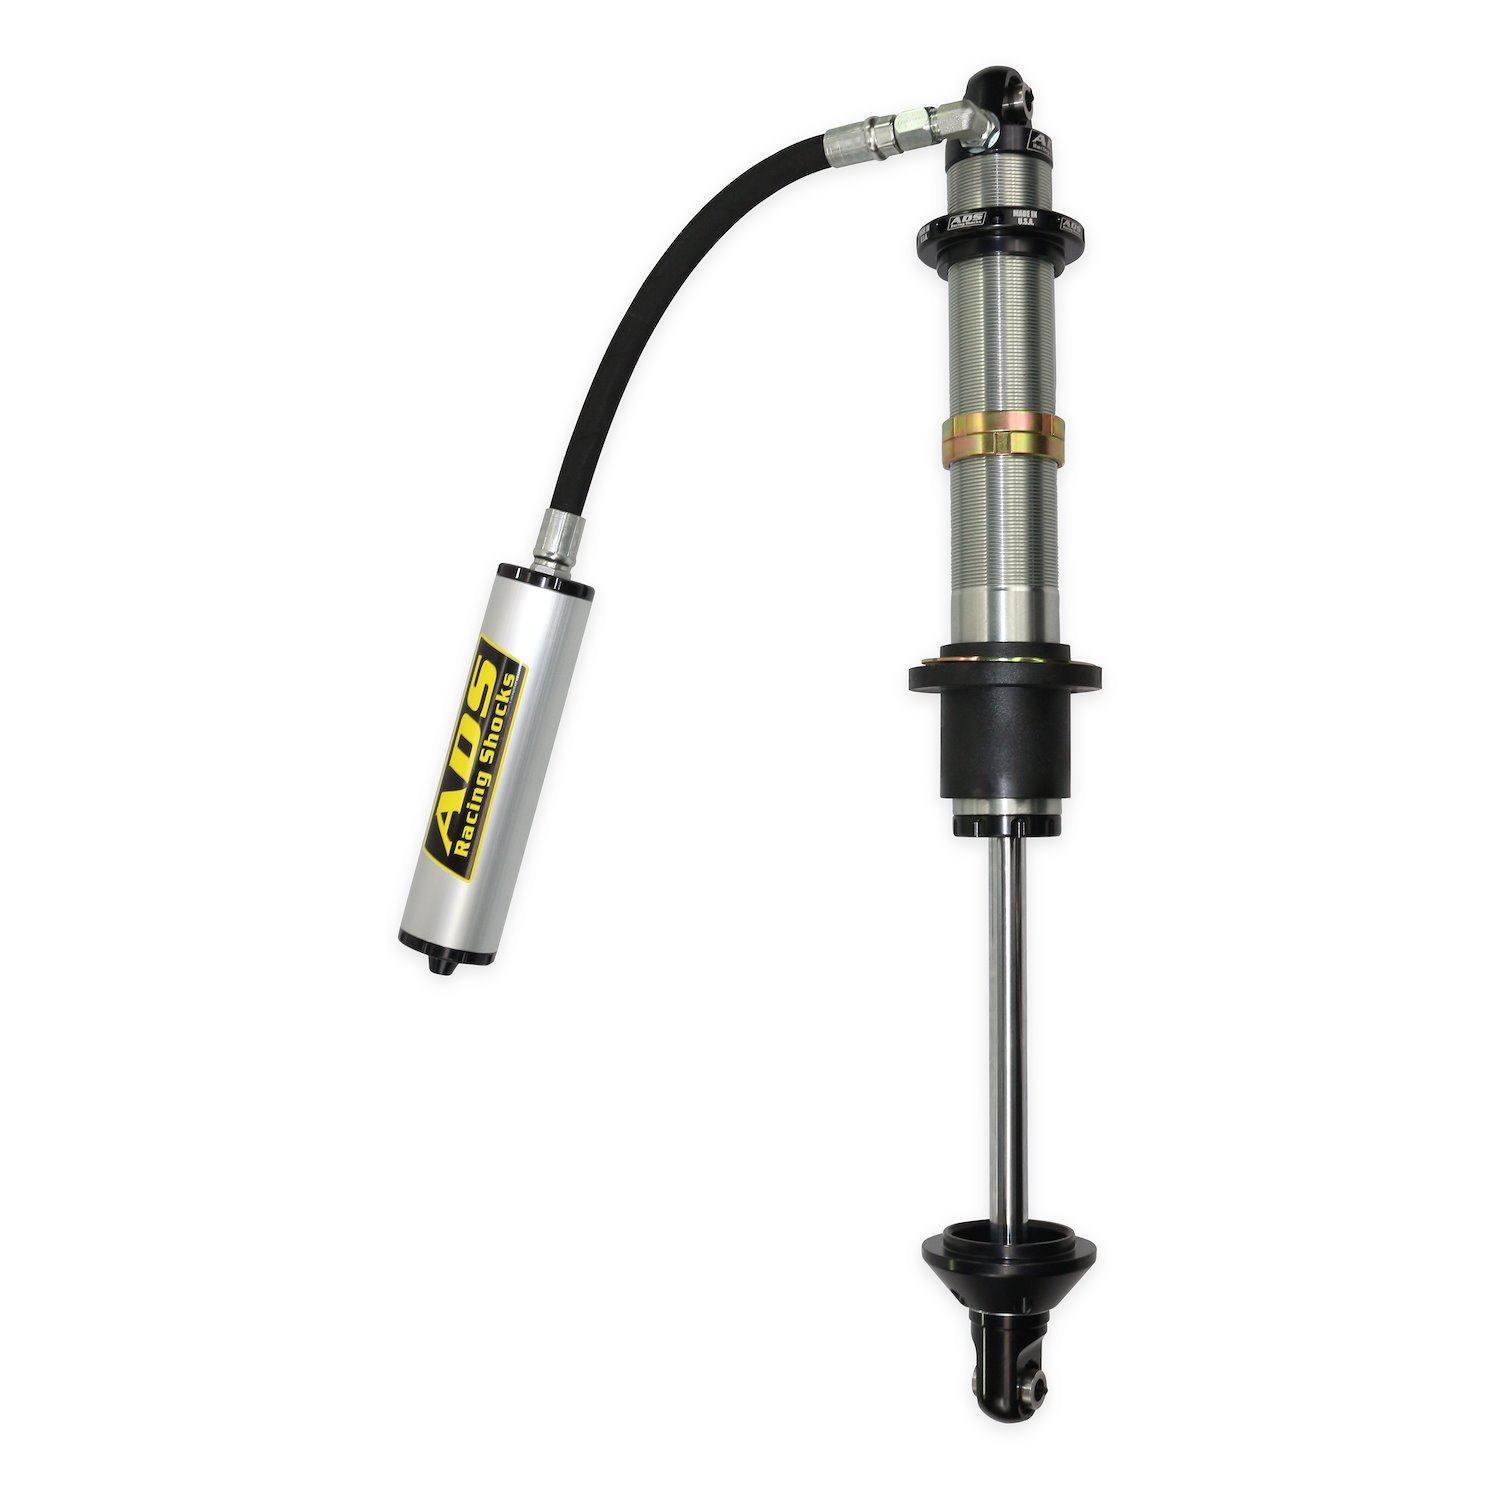 250-COR10-A90 Coil-Over Race Shock, 2.5 in. x 10 in. Stroke, w/ Remote Reservoir (90-Degree Hose), w/ Compression Adjustment